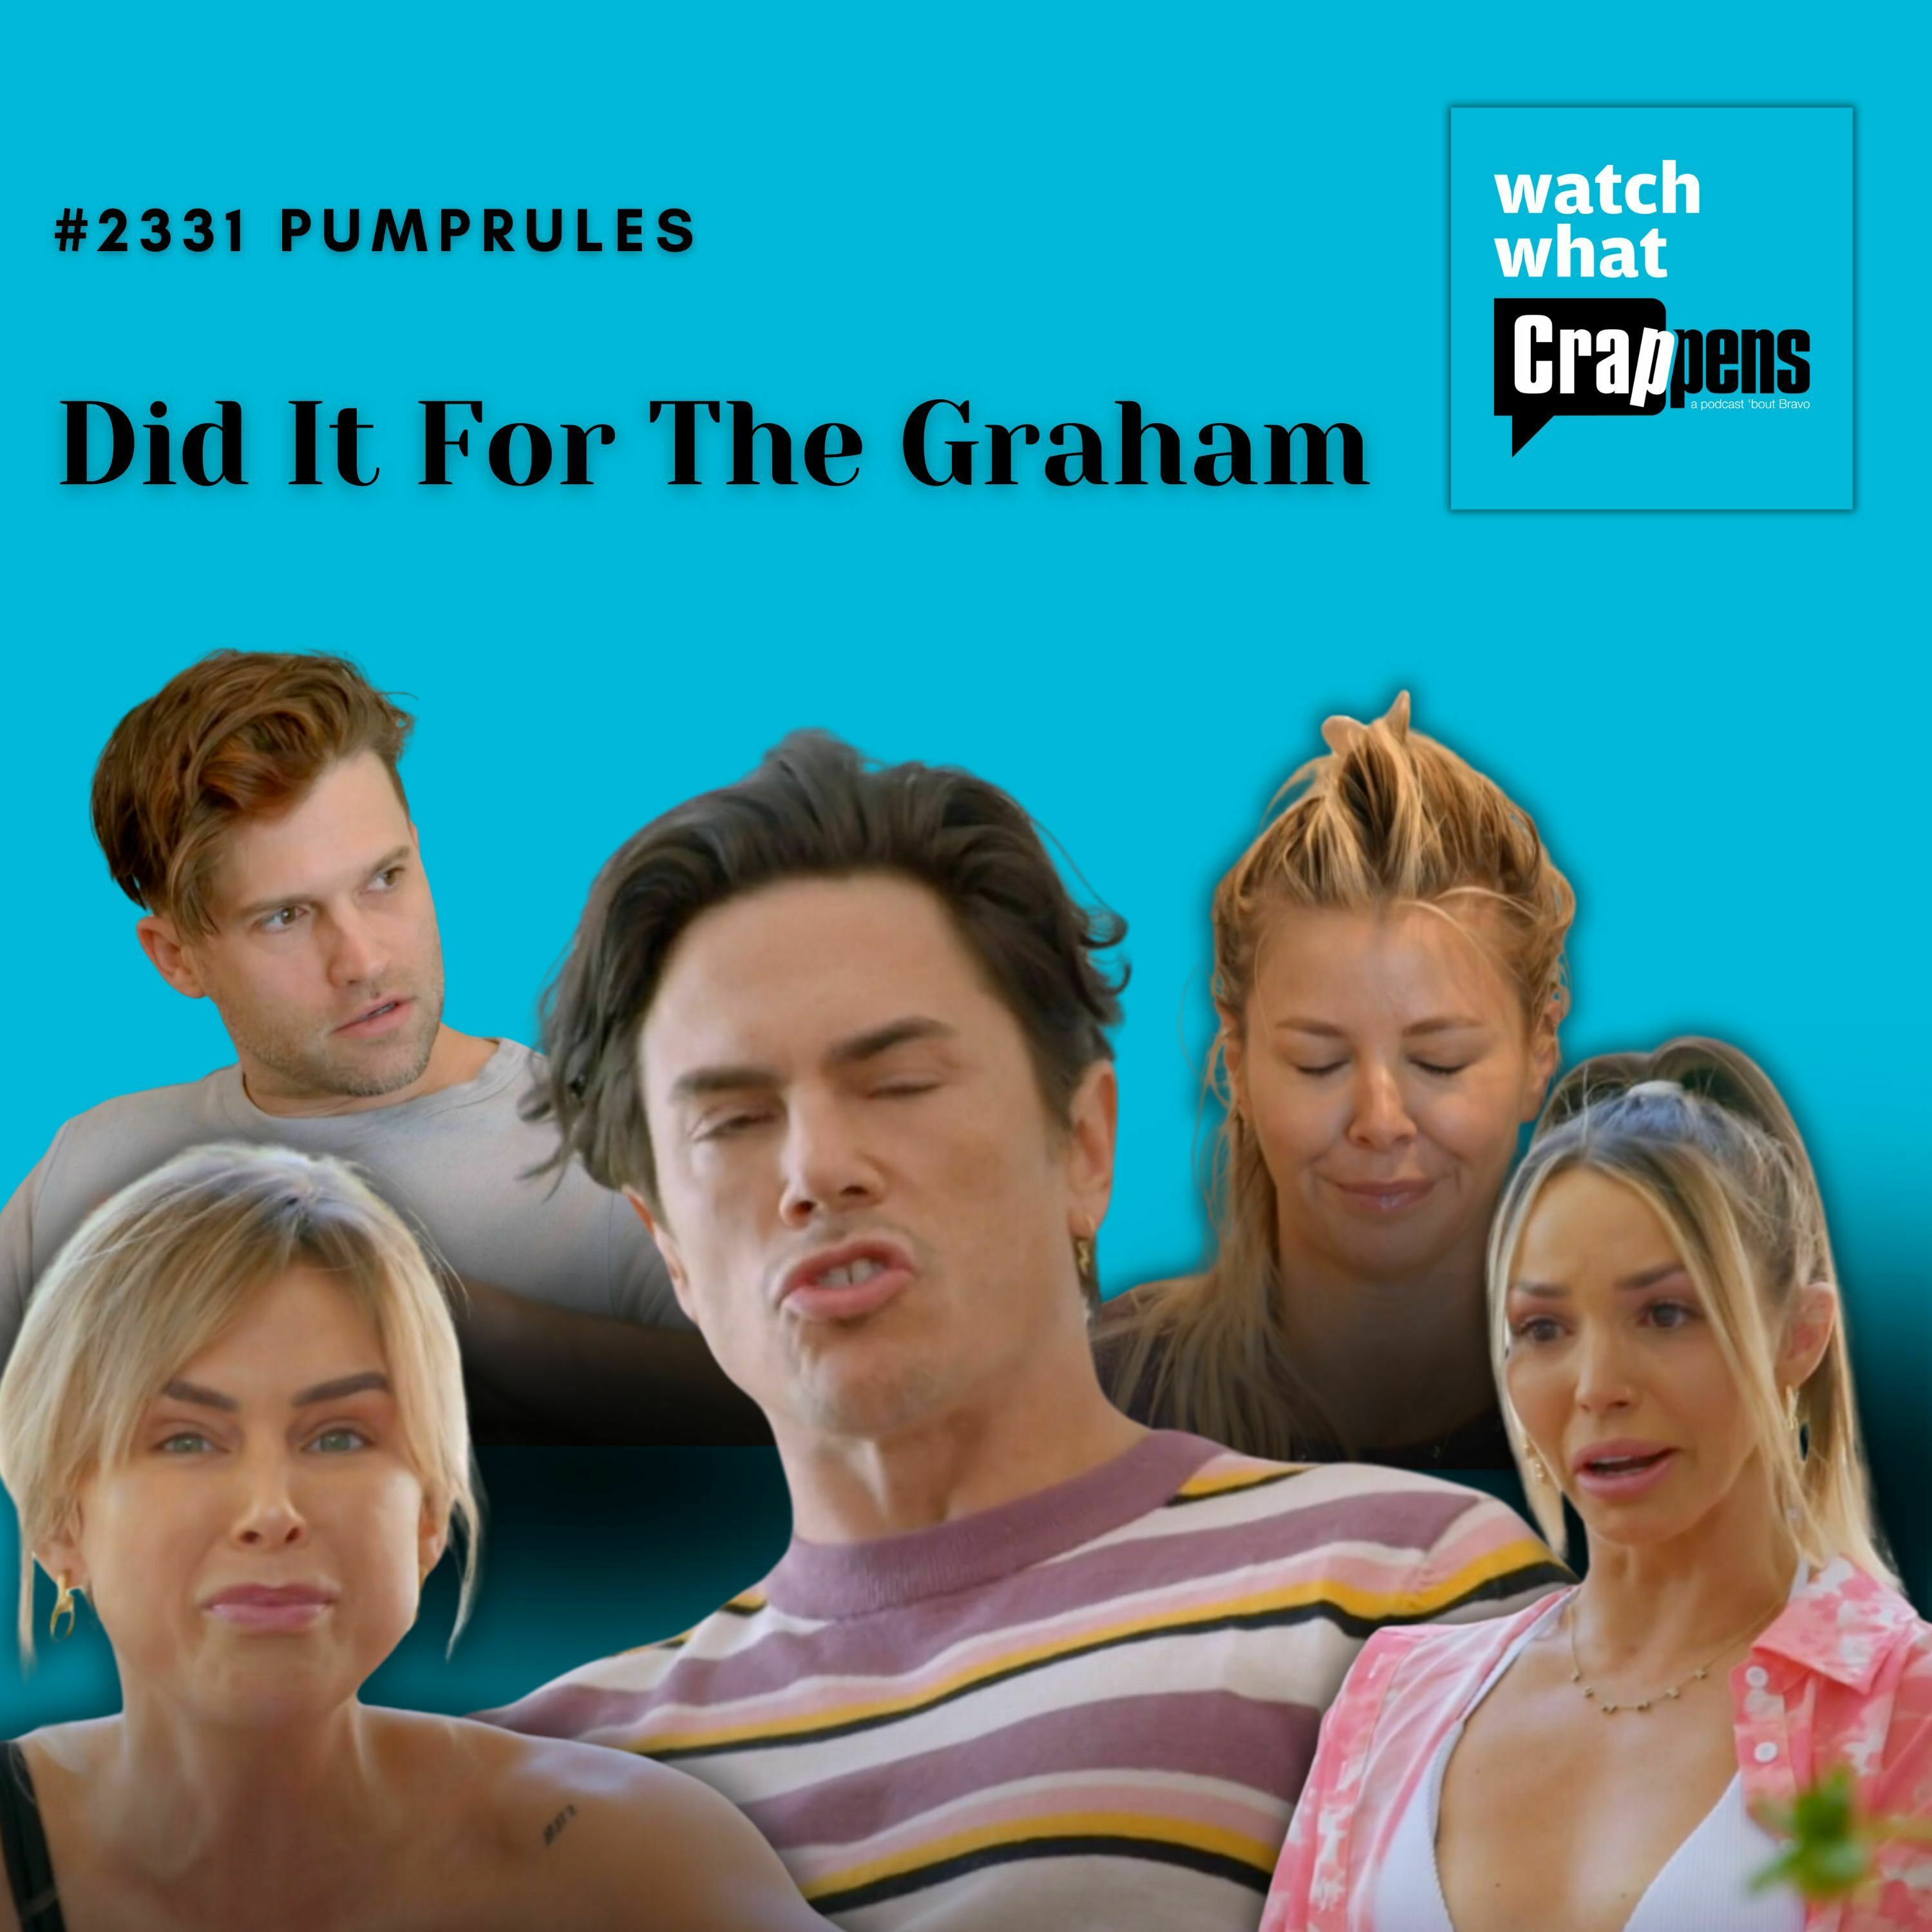 #2331 PumpRules, Part 2: Did It For The Graham